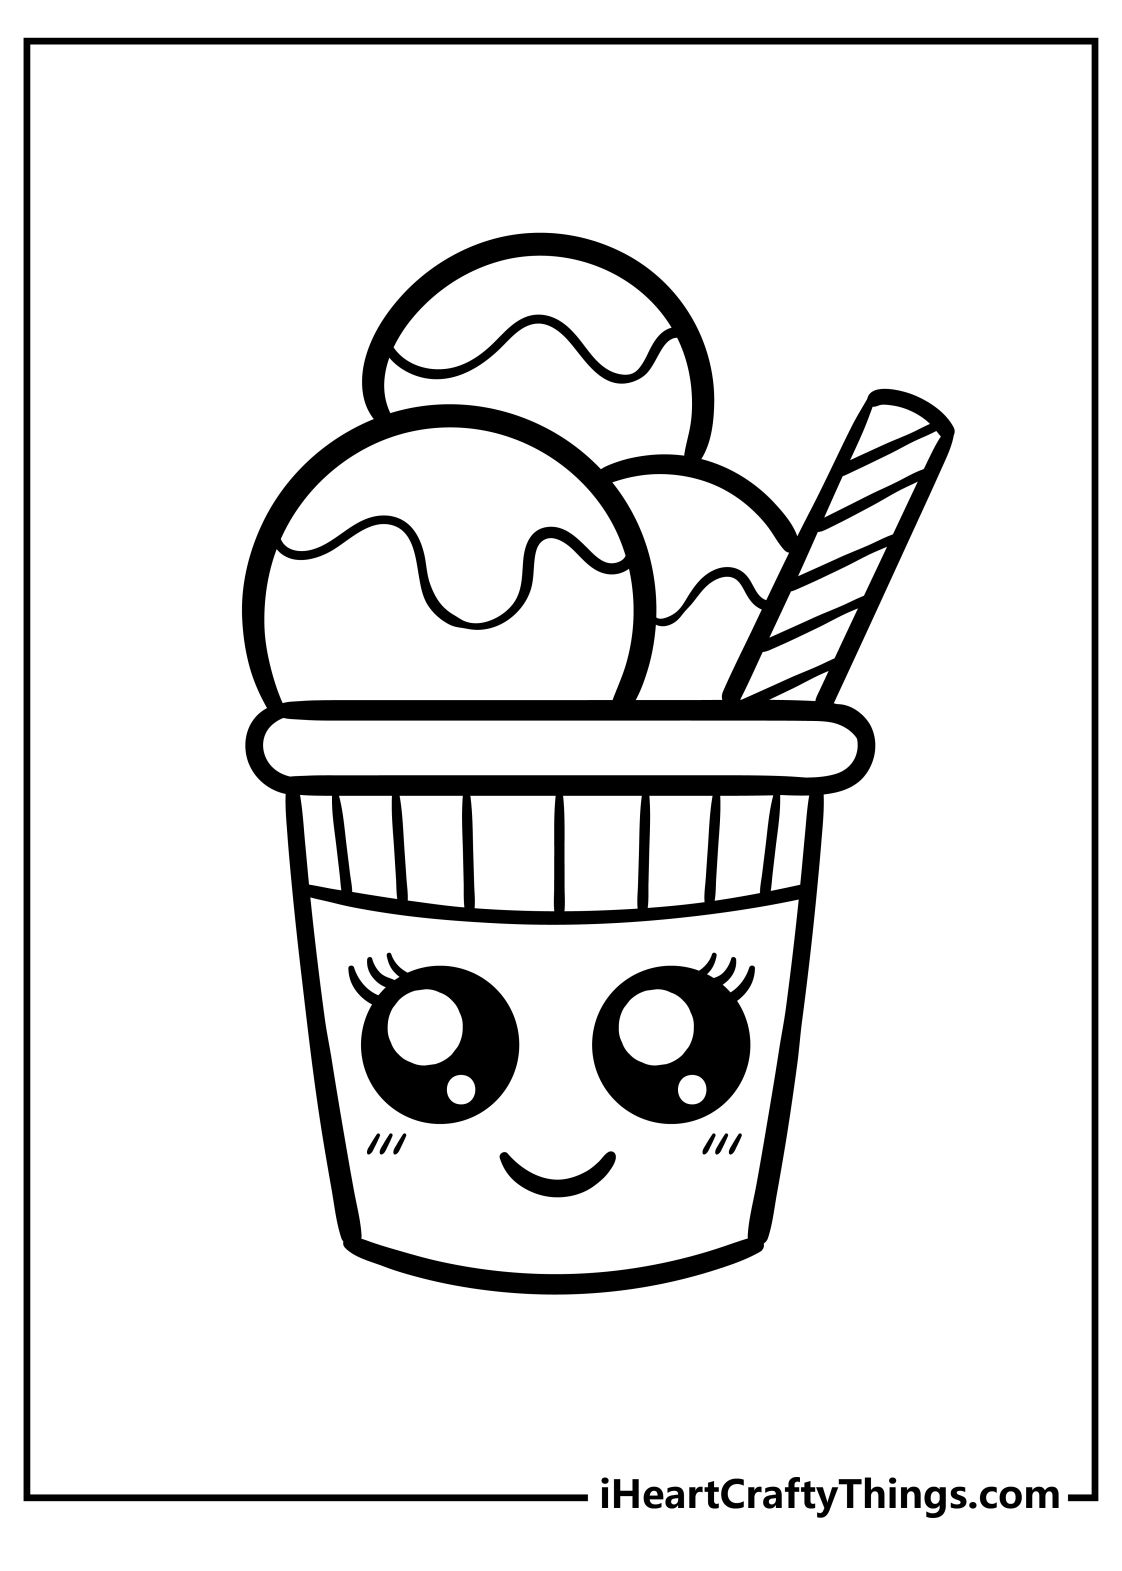 Cute Food Coloring Pages Free Printables